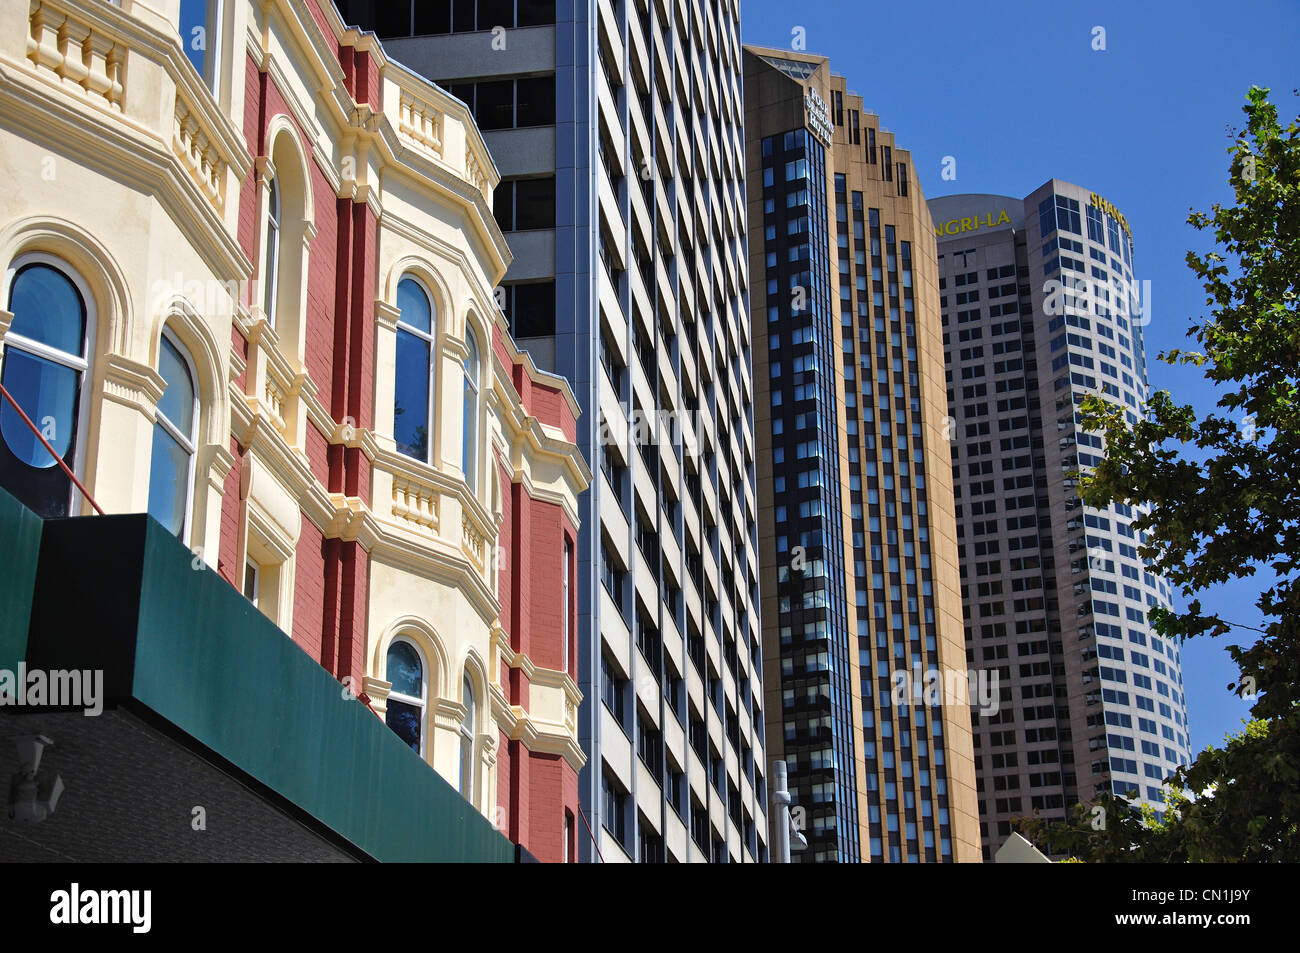 Skyscraper buildings in Alfred Street, Central Business District, Sydney, New South Wales, Australia Stock Photo